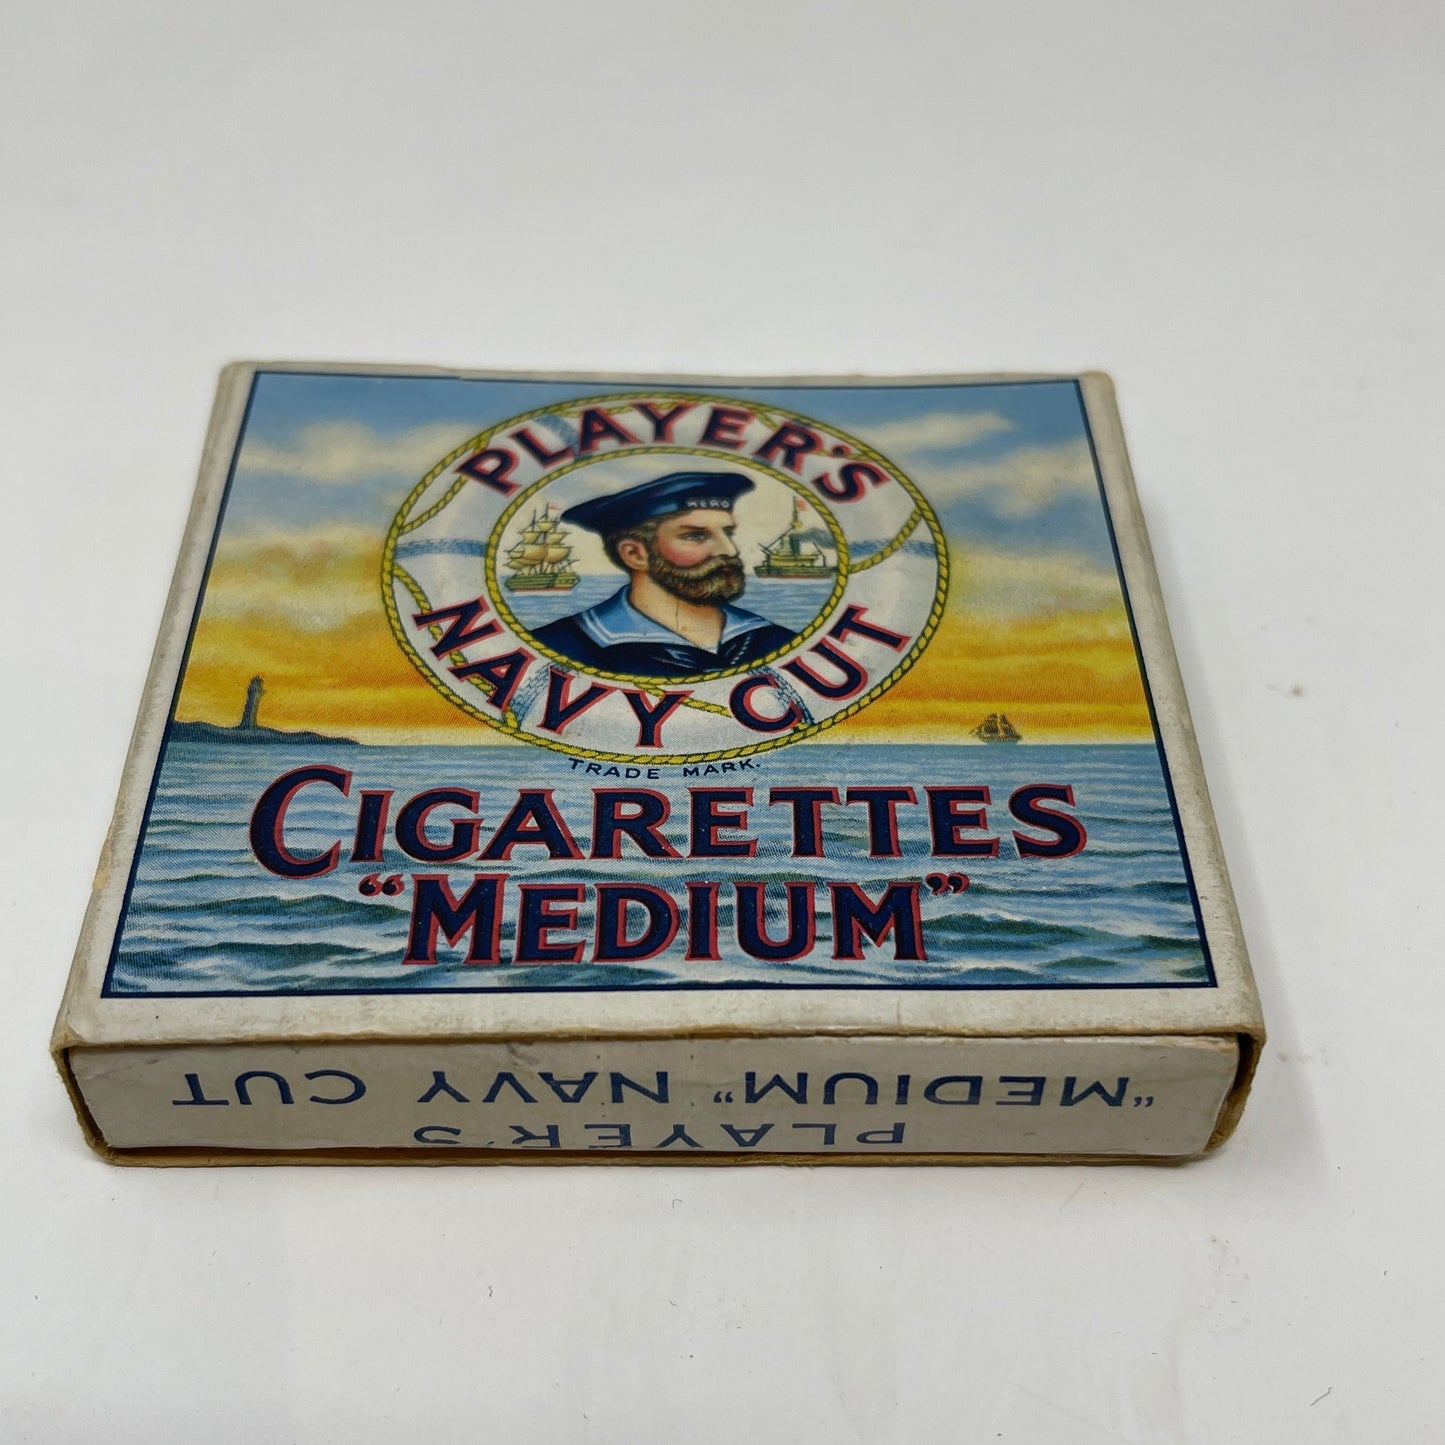 A Packet of Navy Cut Cigarettes